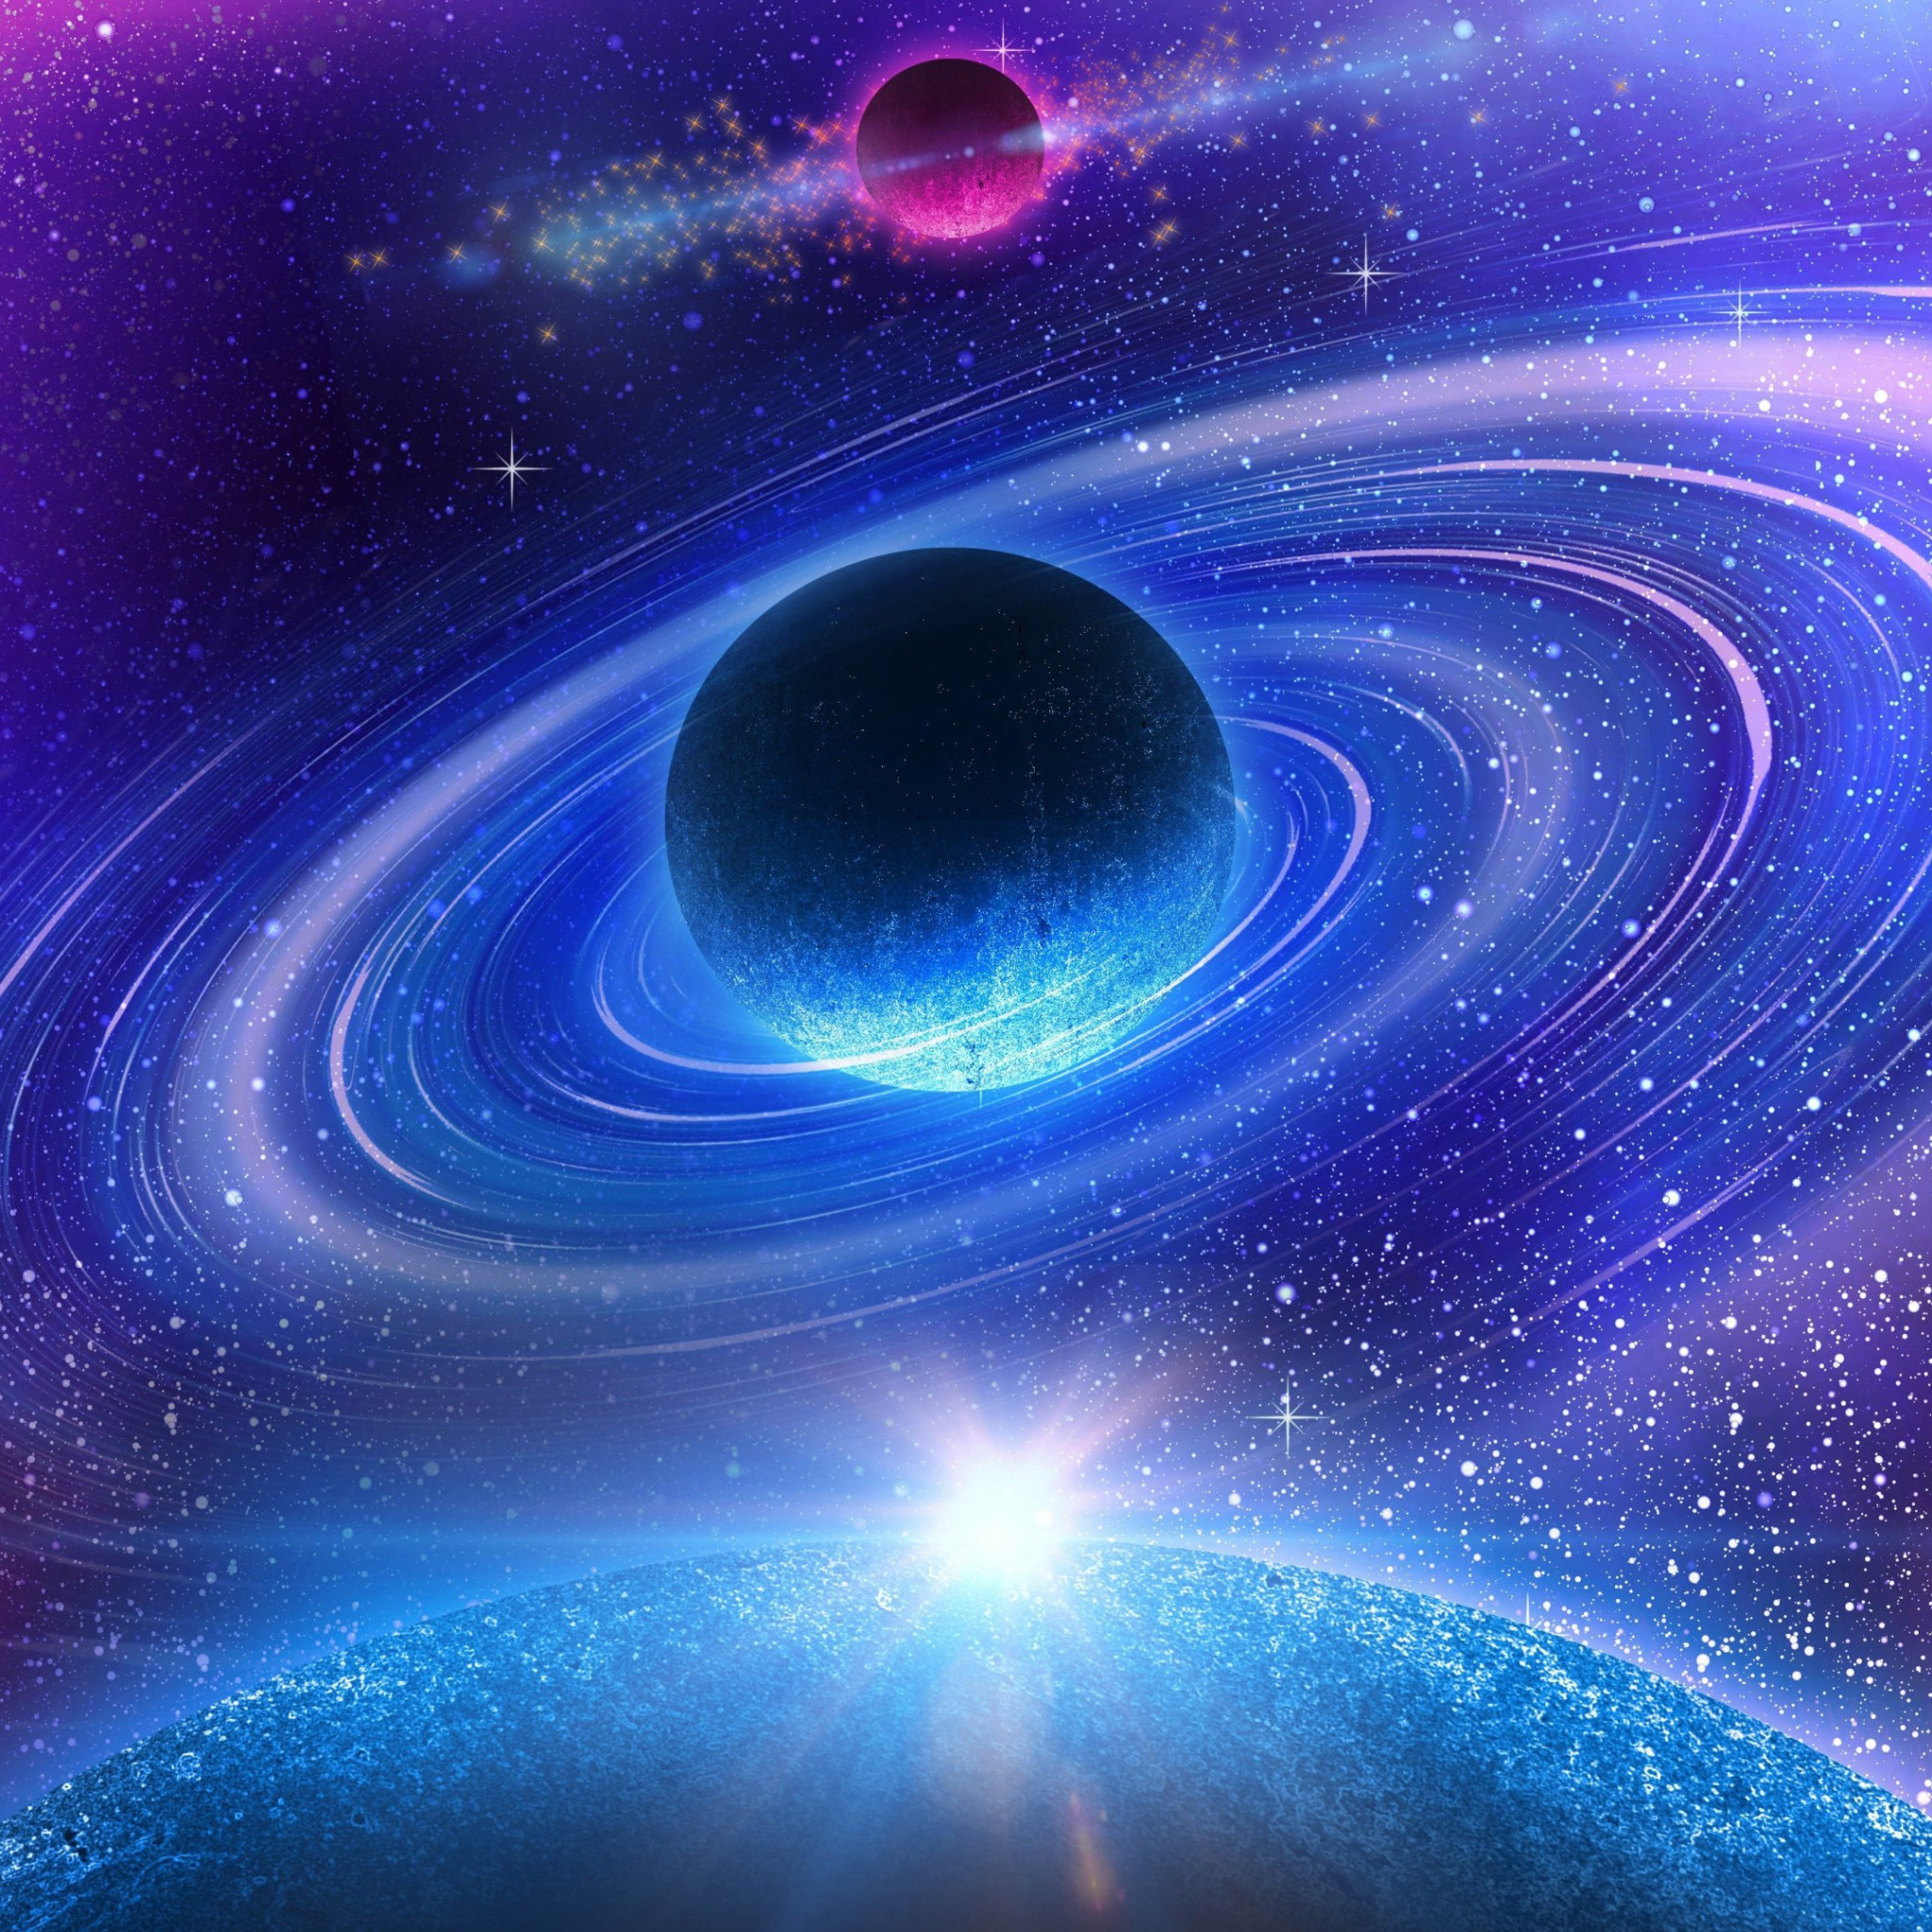 Das Planet with rings Wallpaper 2048x2048